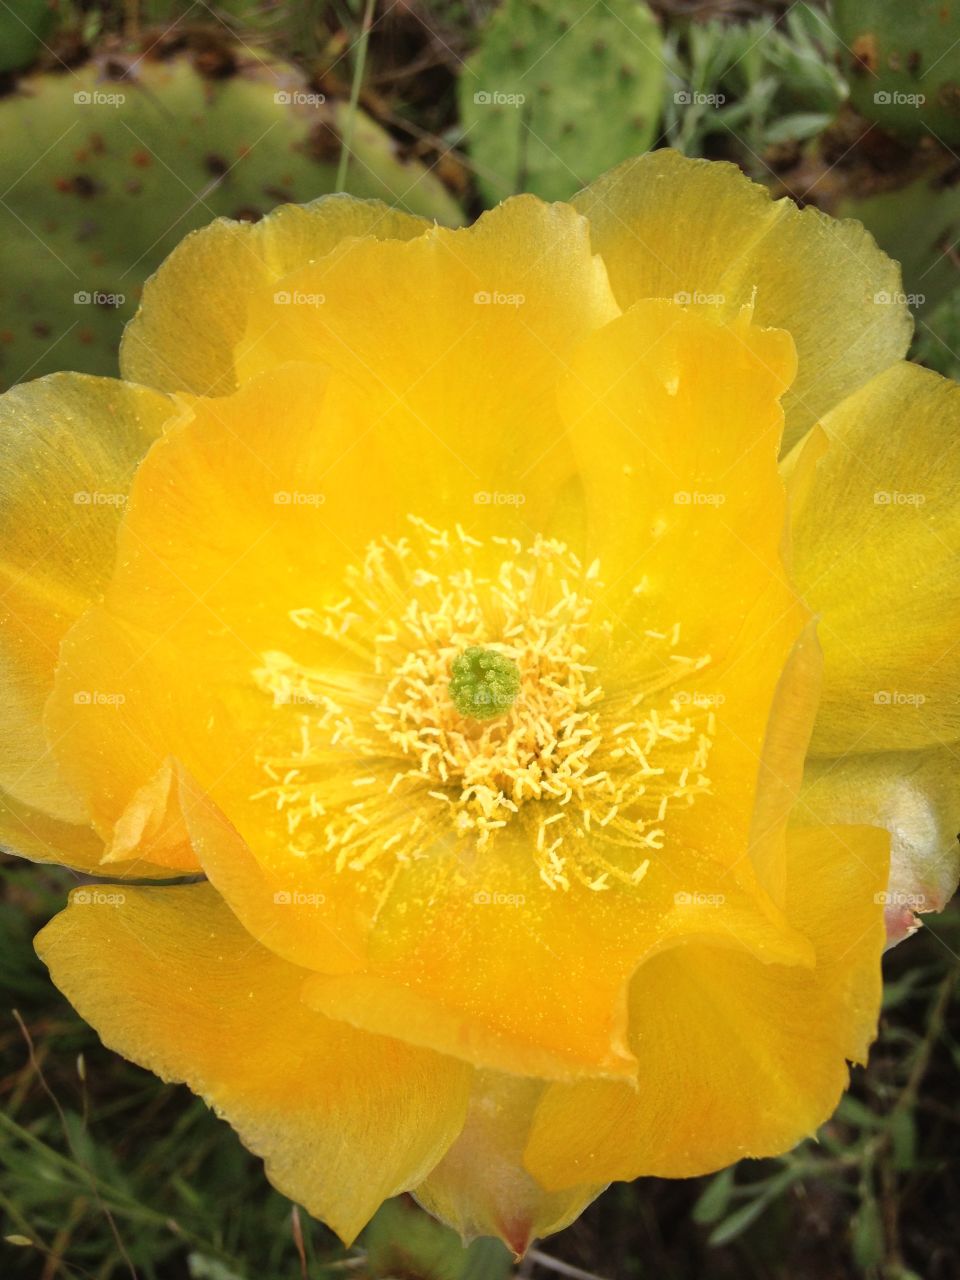 Beauty in the rough. Prickly pear cactus flower